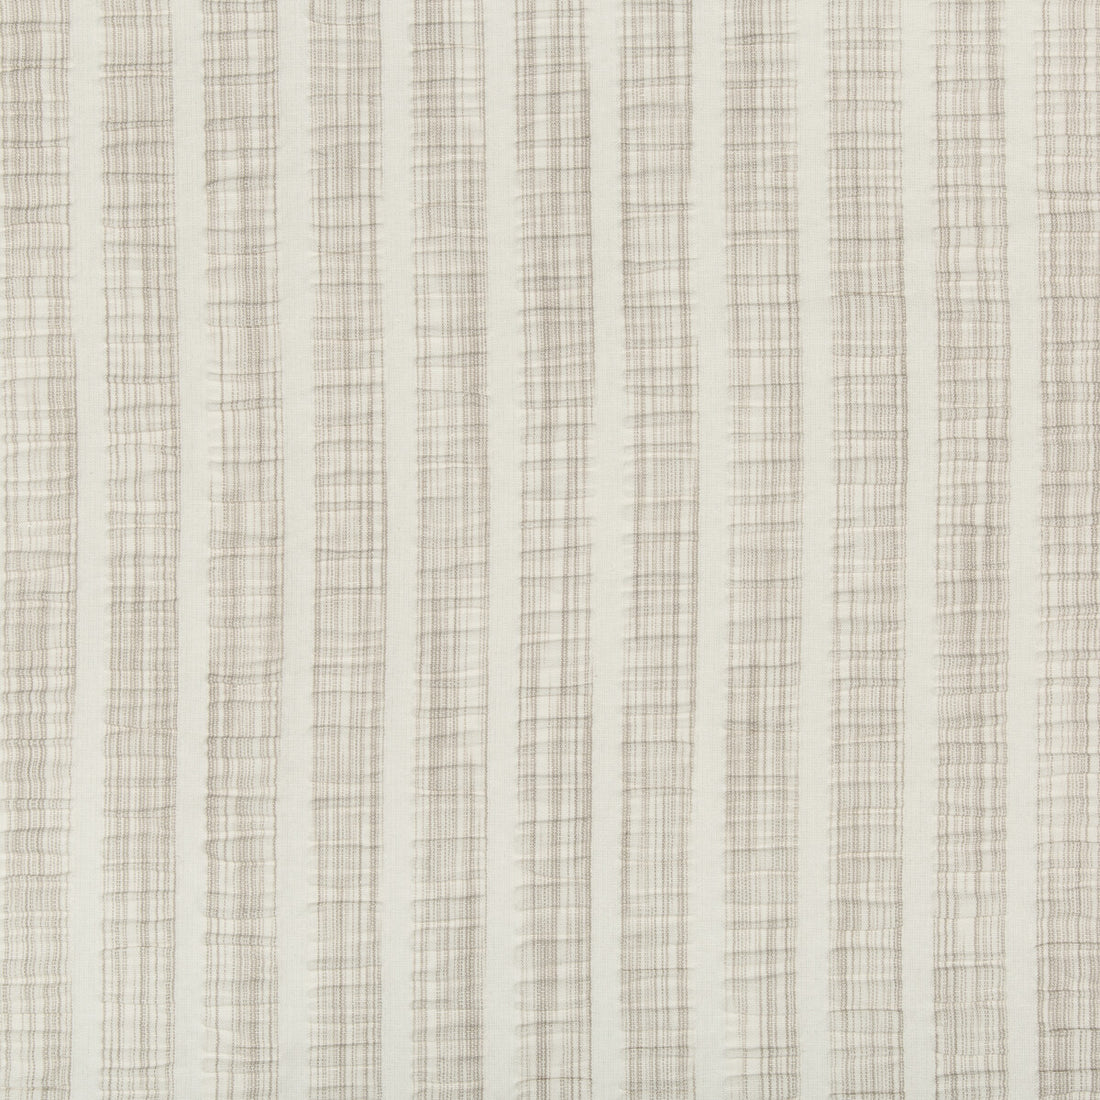 Parcevall fabric in linen color - pattern 35298.16.0 - by Kravet Basics in the Bermuda collection